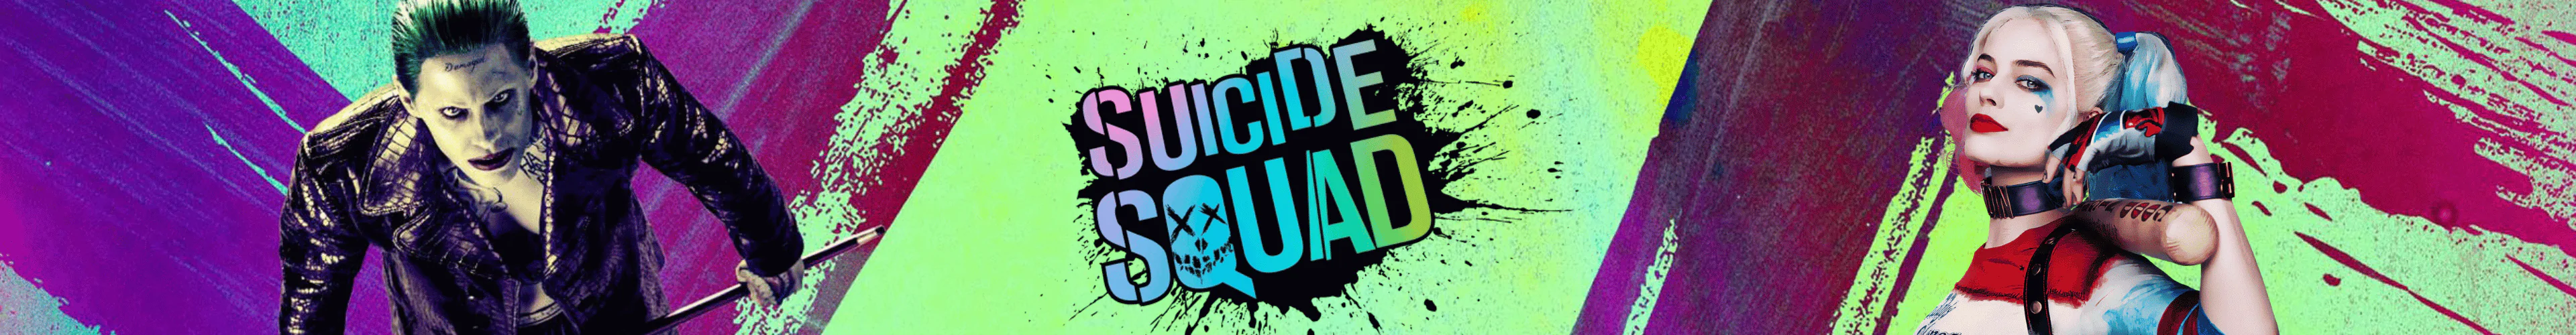 Suicide Squad products banner